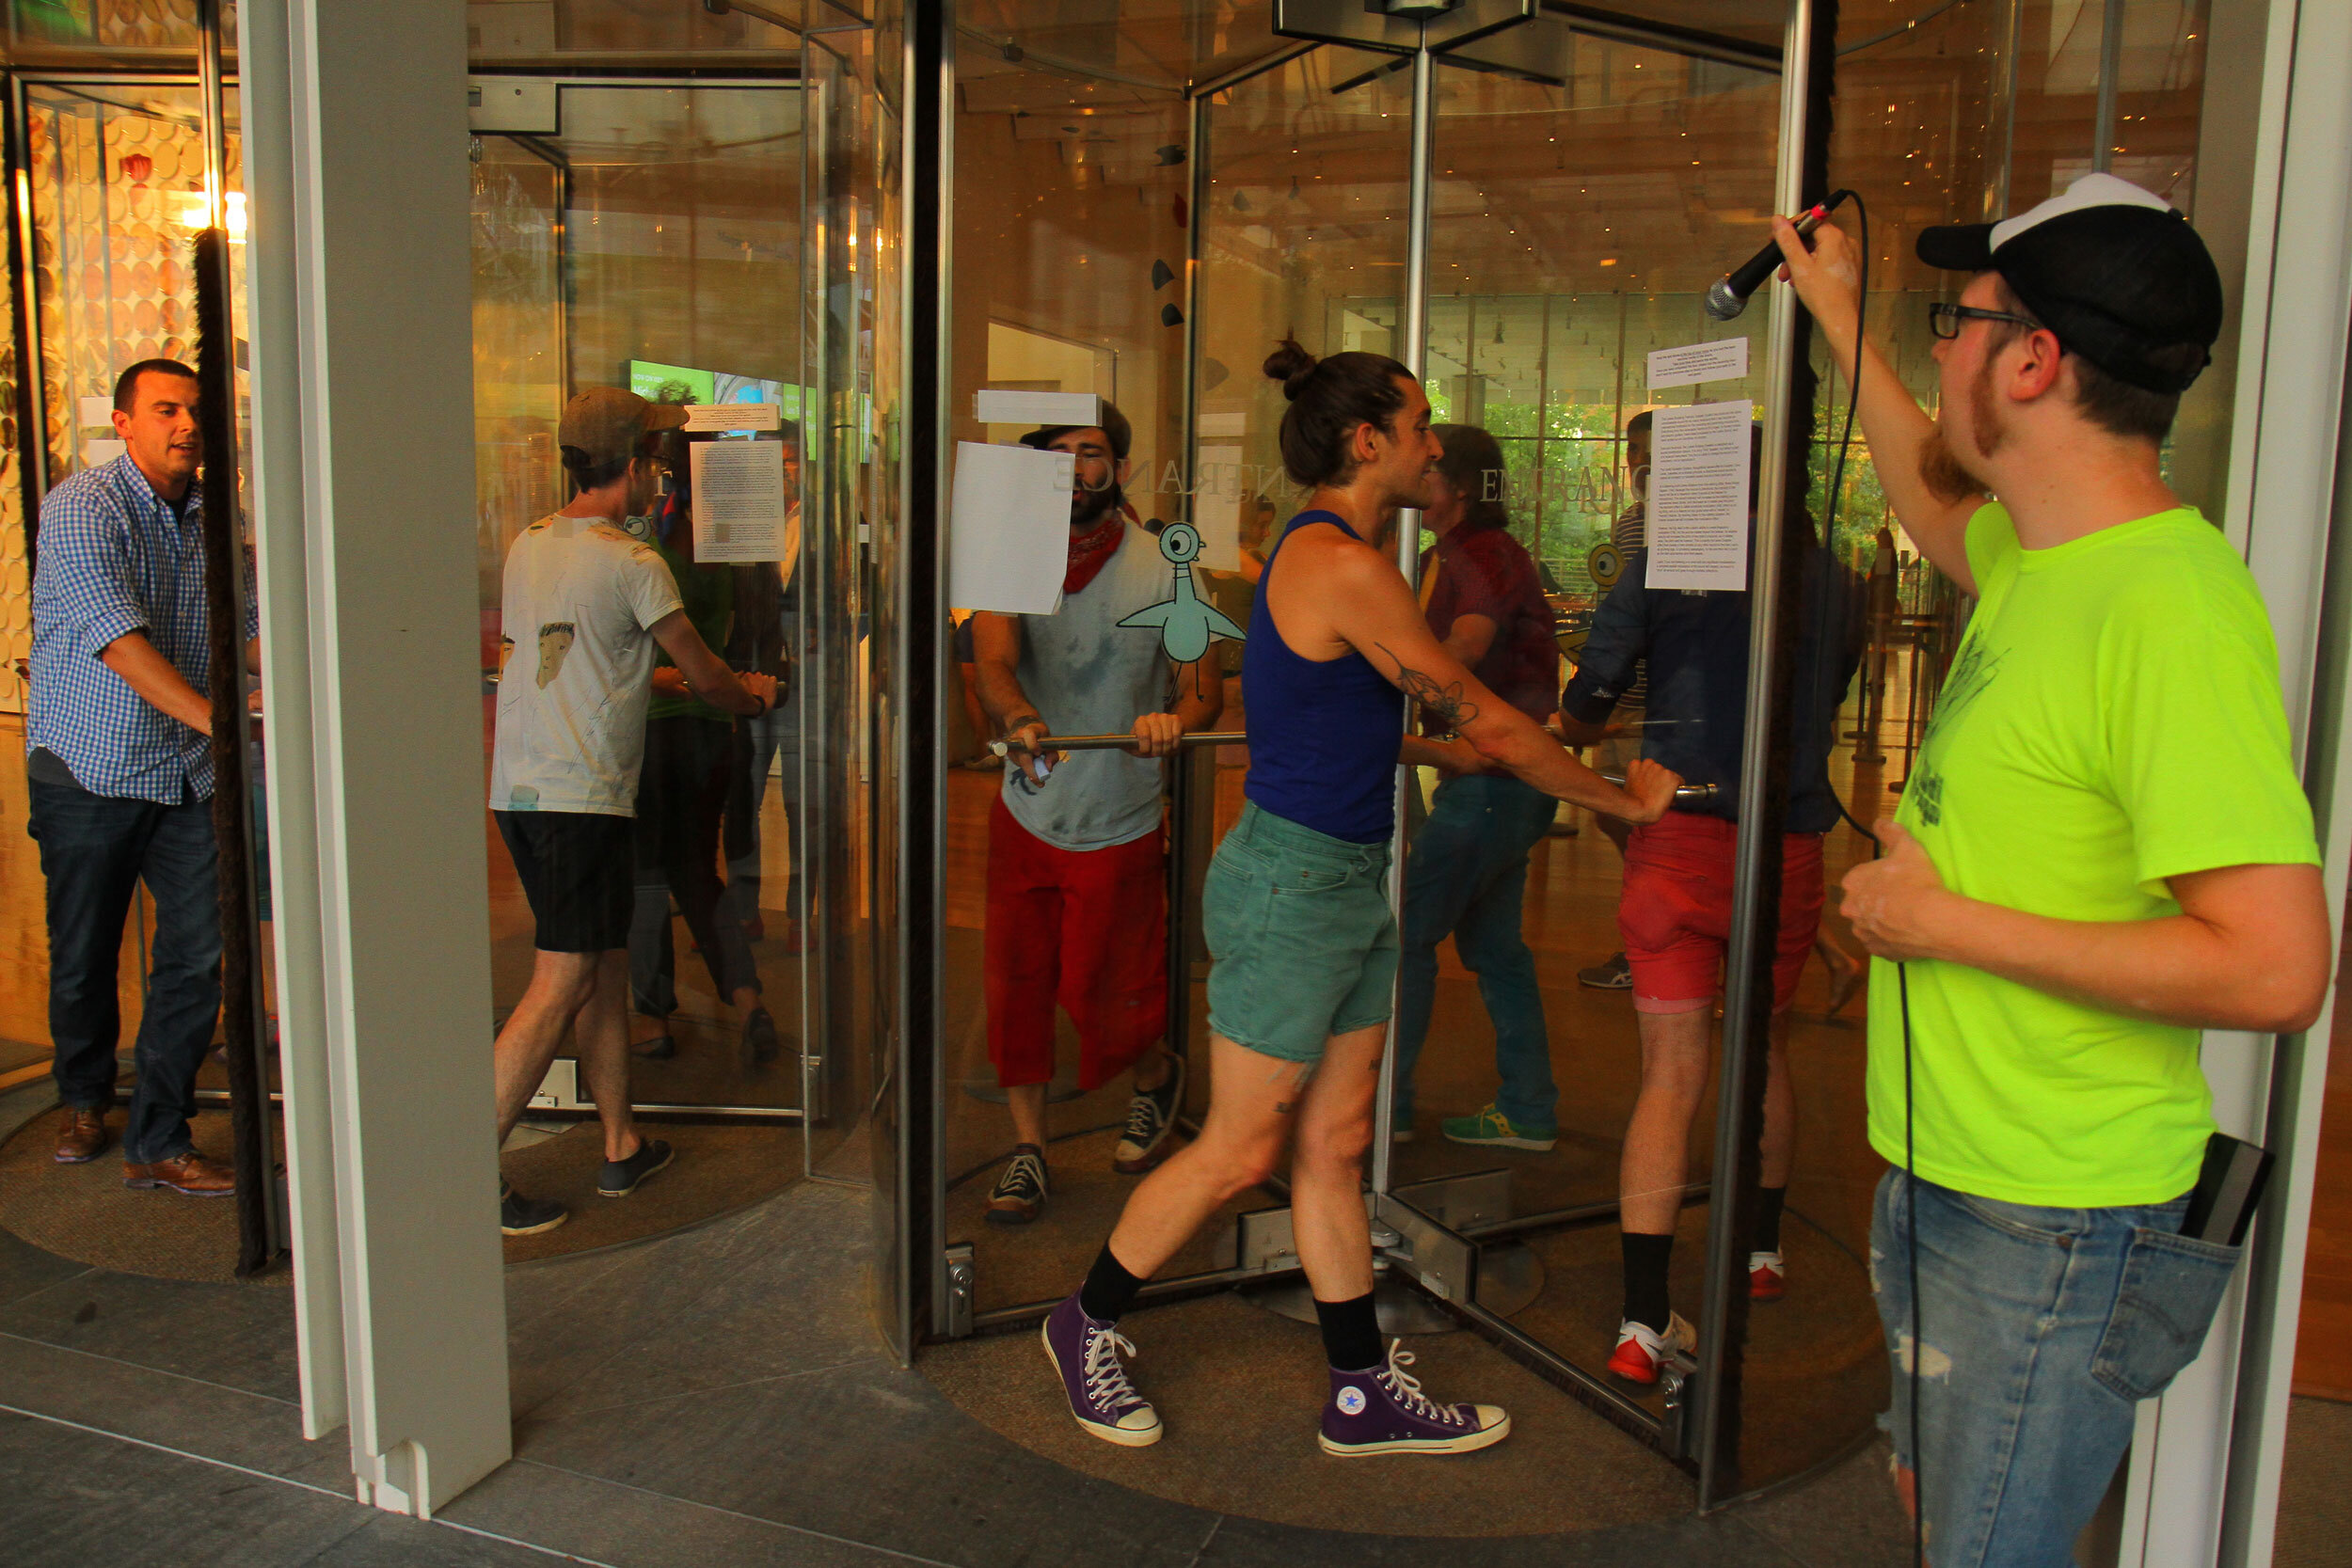 Many performers are walking in circles in 2 revolving glass doors reading text. Another performer is holding up a microphone from outside to catch their voices as they pass.